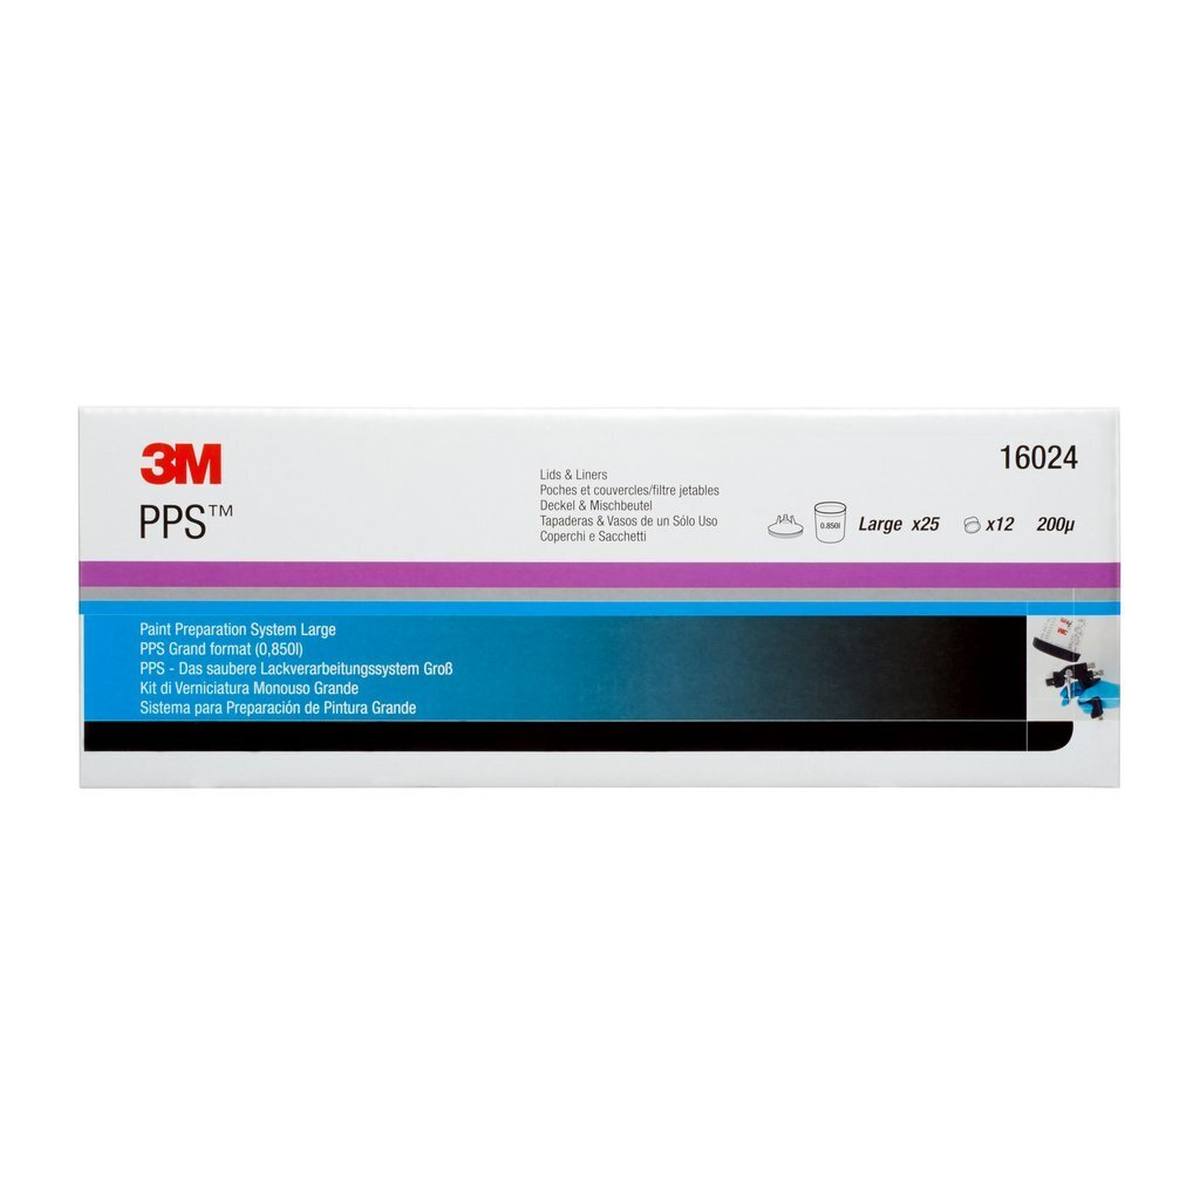 3M PPS Kit Filter 200my, 25 bags